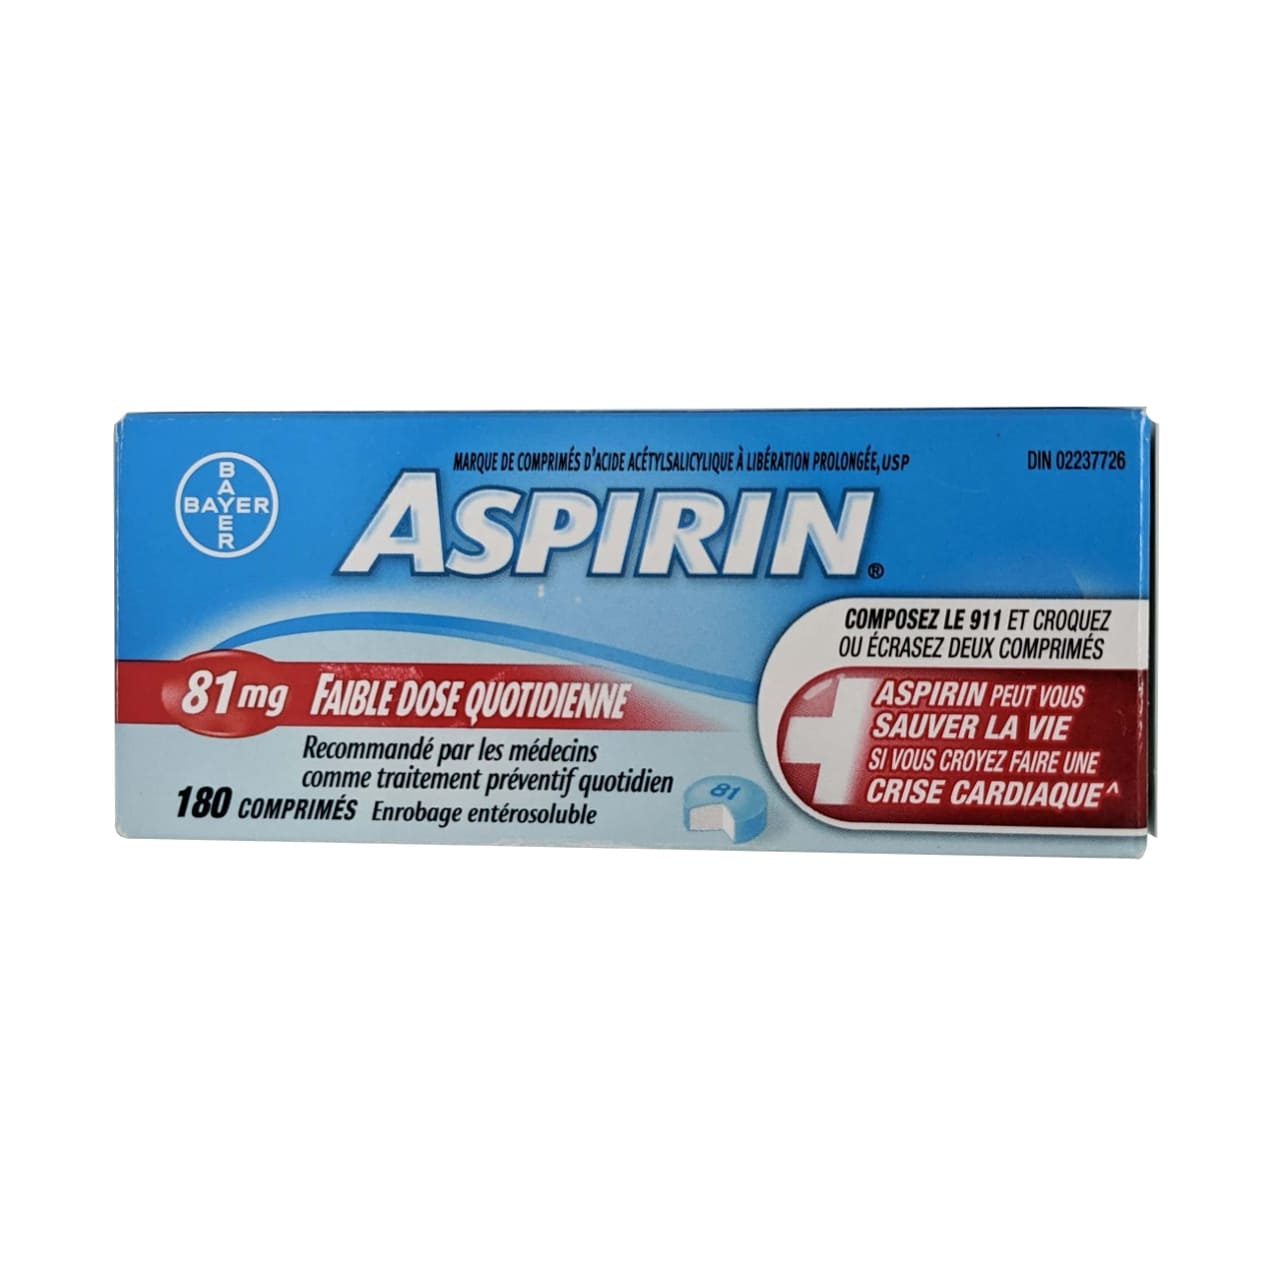 Product package for Aspirin Acetylsalicylic Acid 81mg Low Dose Delayed Release Tablets 180 pack in French